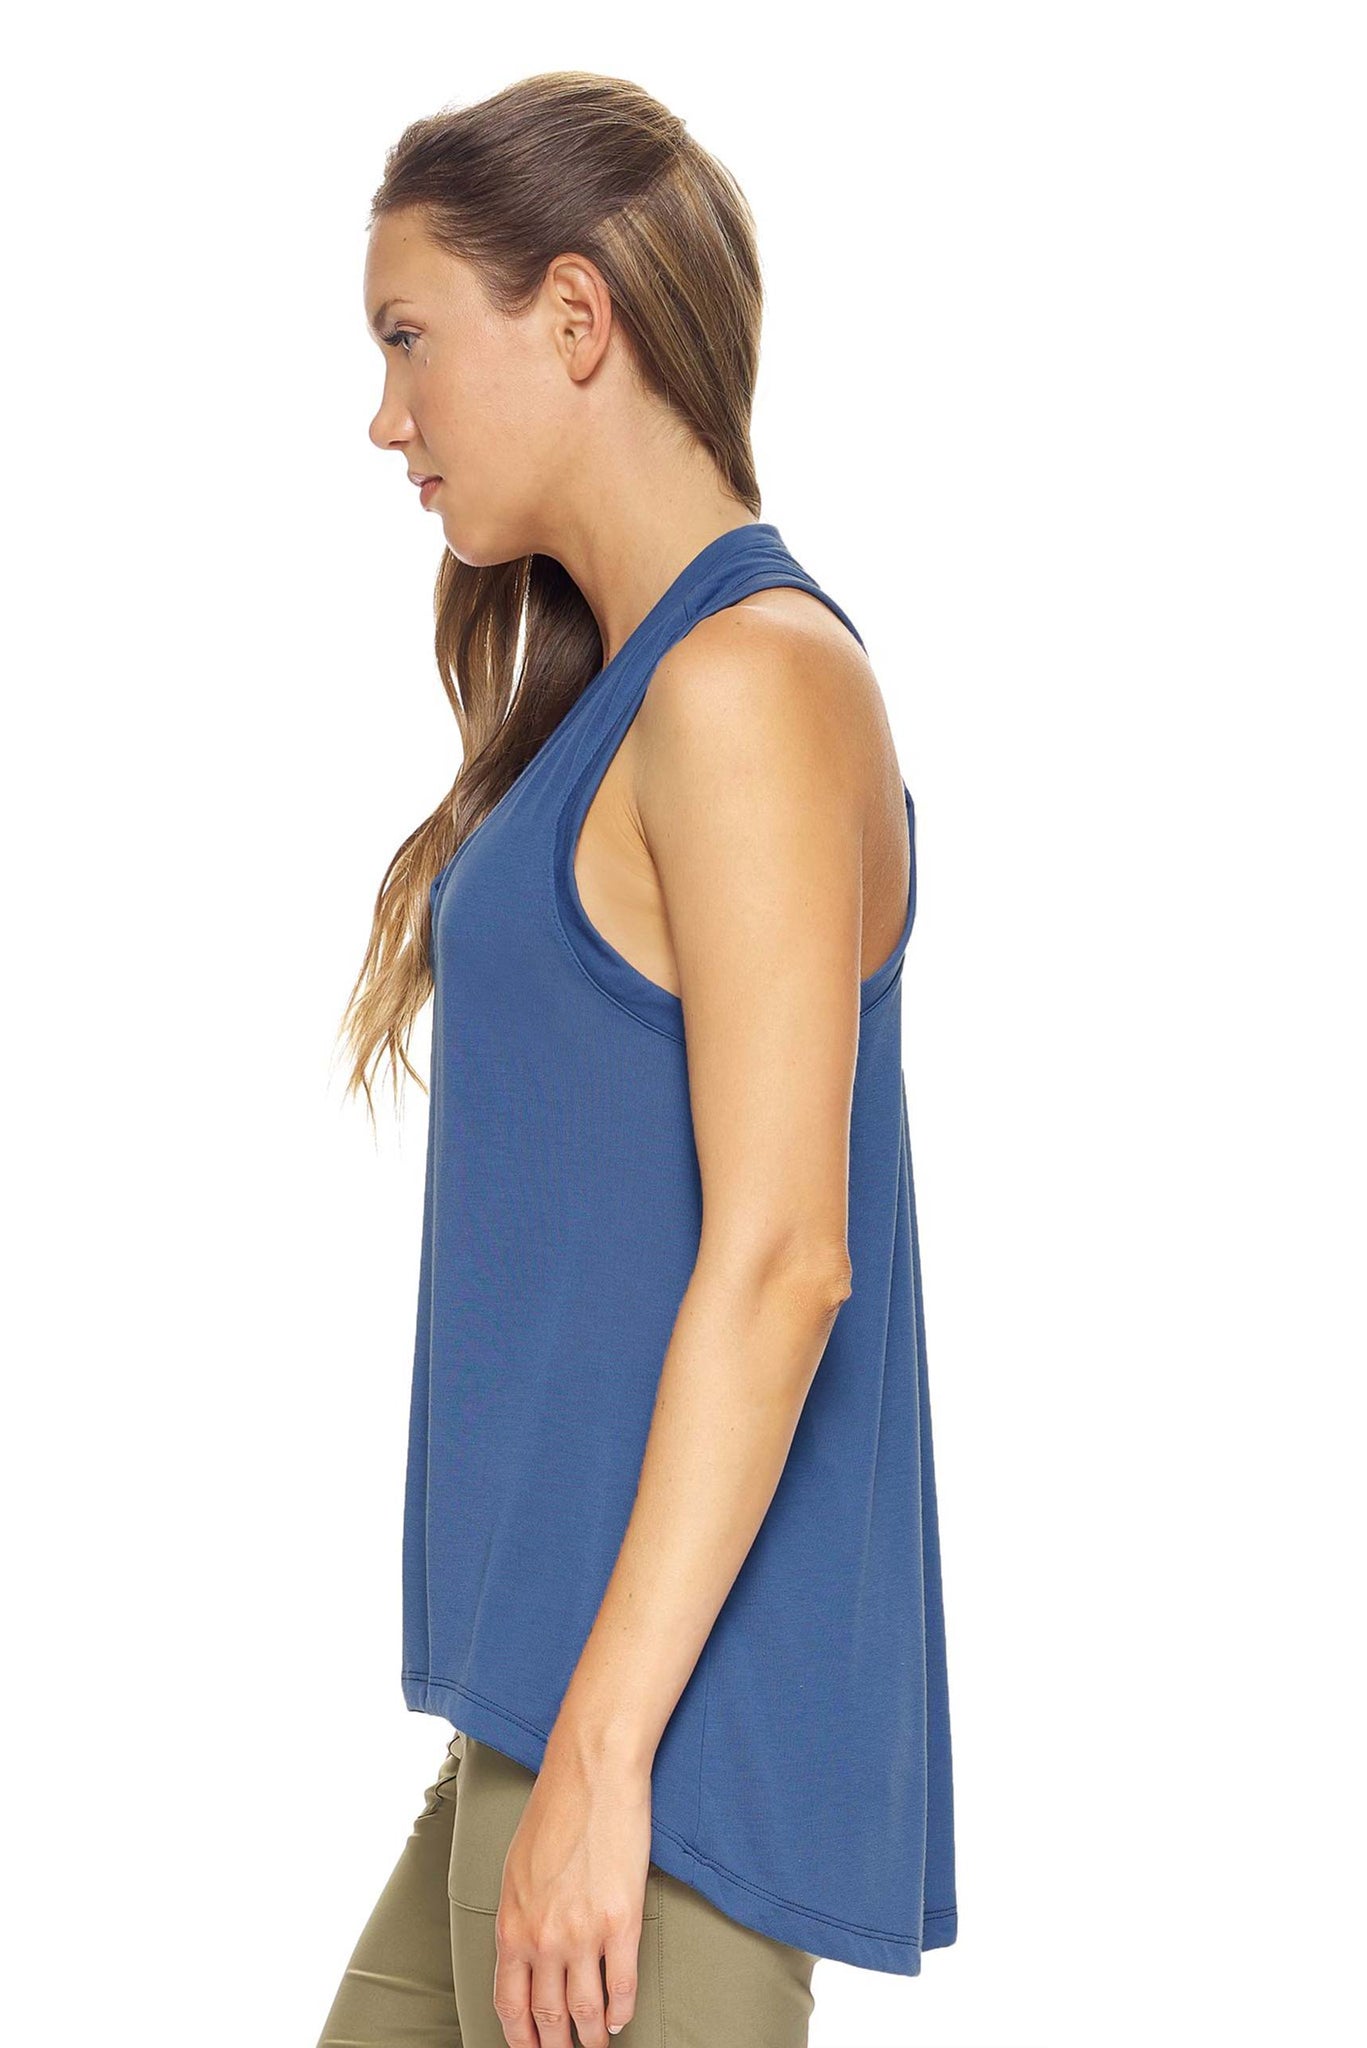 Expert Brand Wholesale Women's Siro V-neck Racerback Tank Made in the USA Stone Blue BE222 image 2#stone-blue